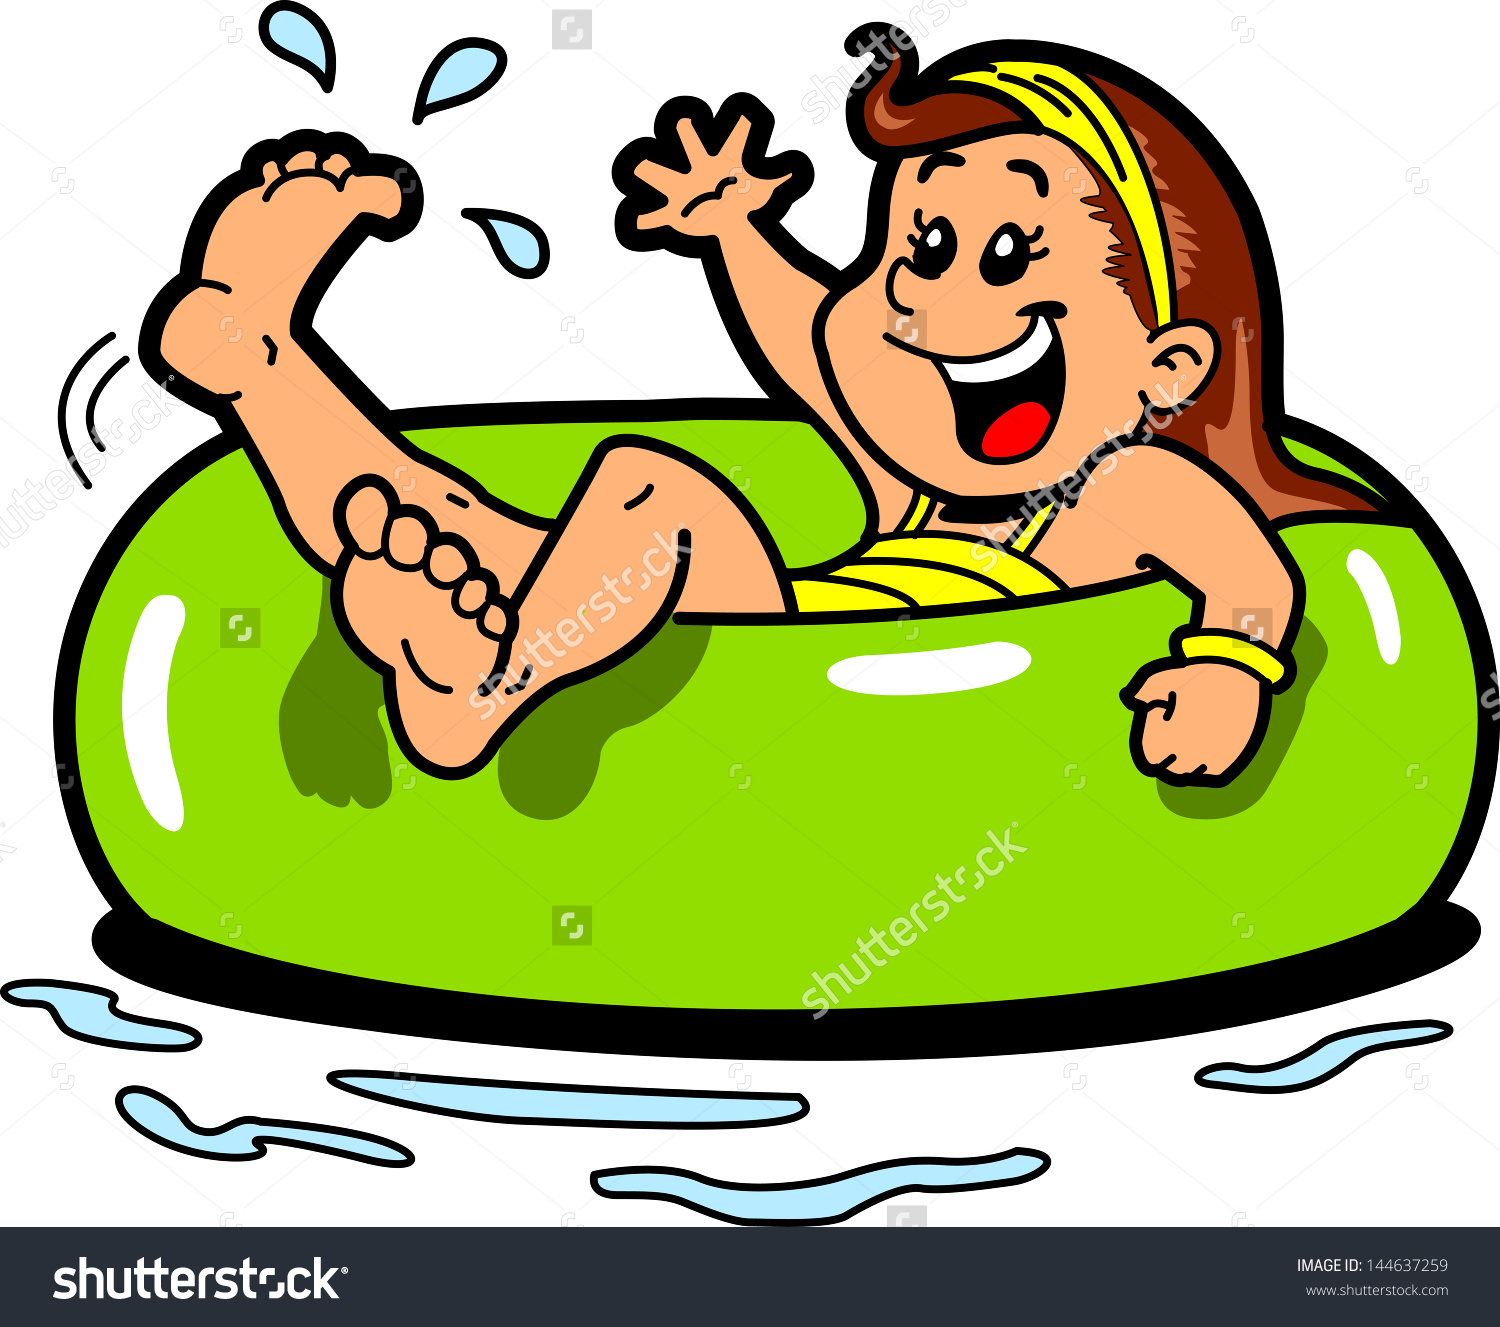 Boat clipart tubing. Free iv clipartmansion com